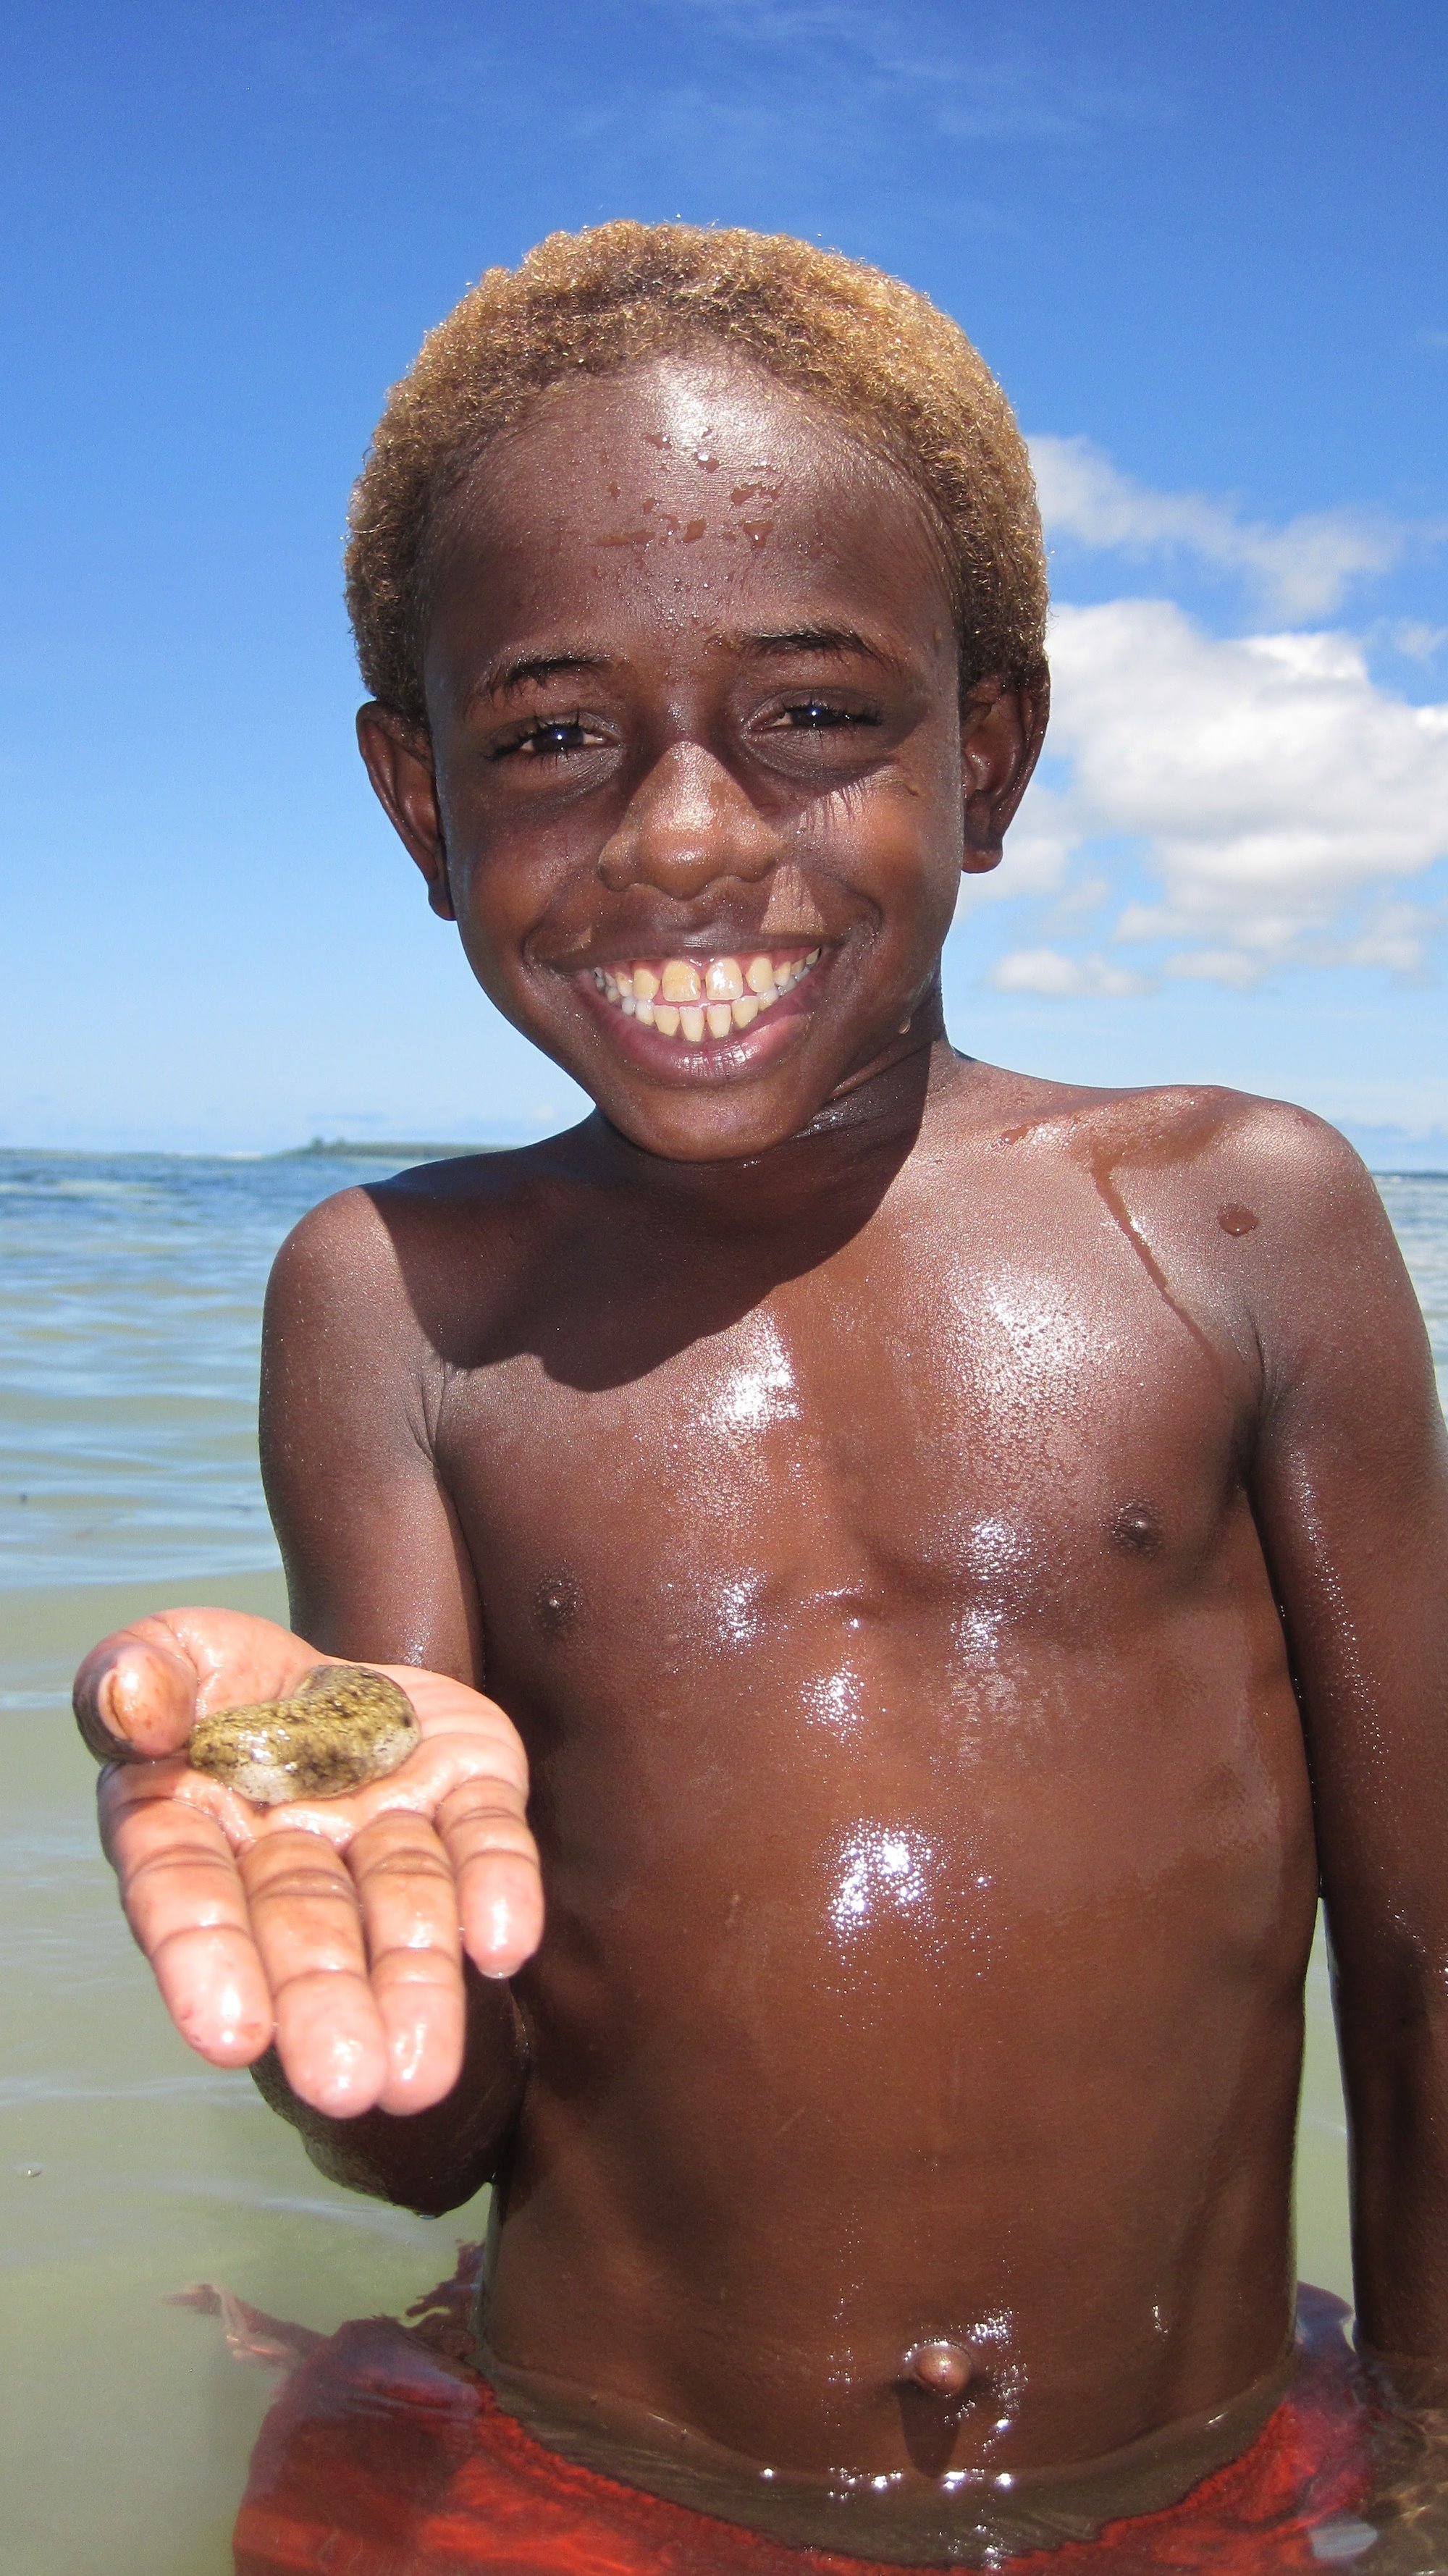 Young boy from PNG holding a small sea cucumber in the palm of his hand, standing in the ocean